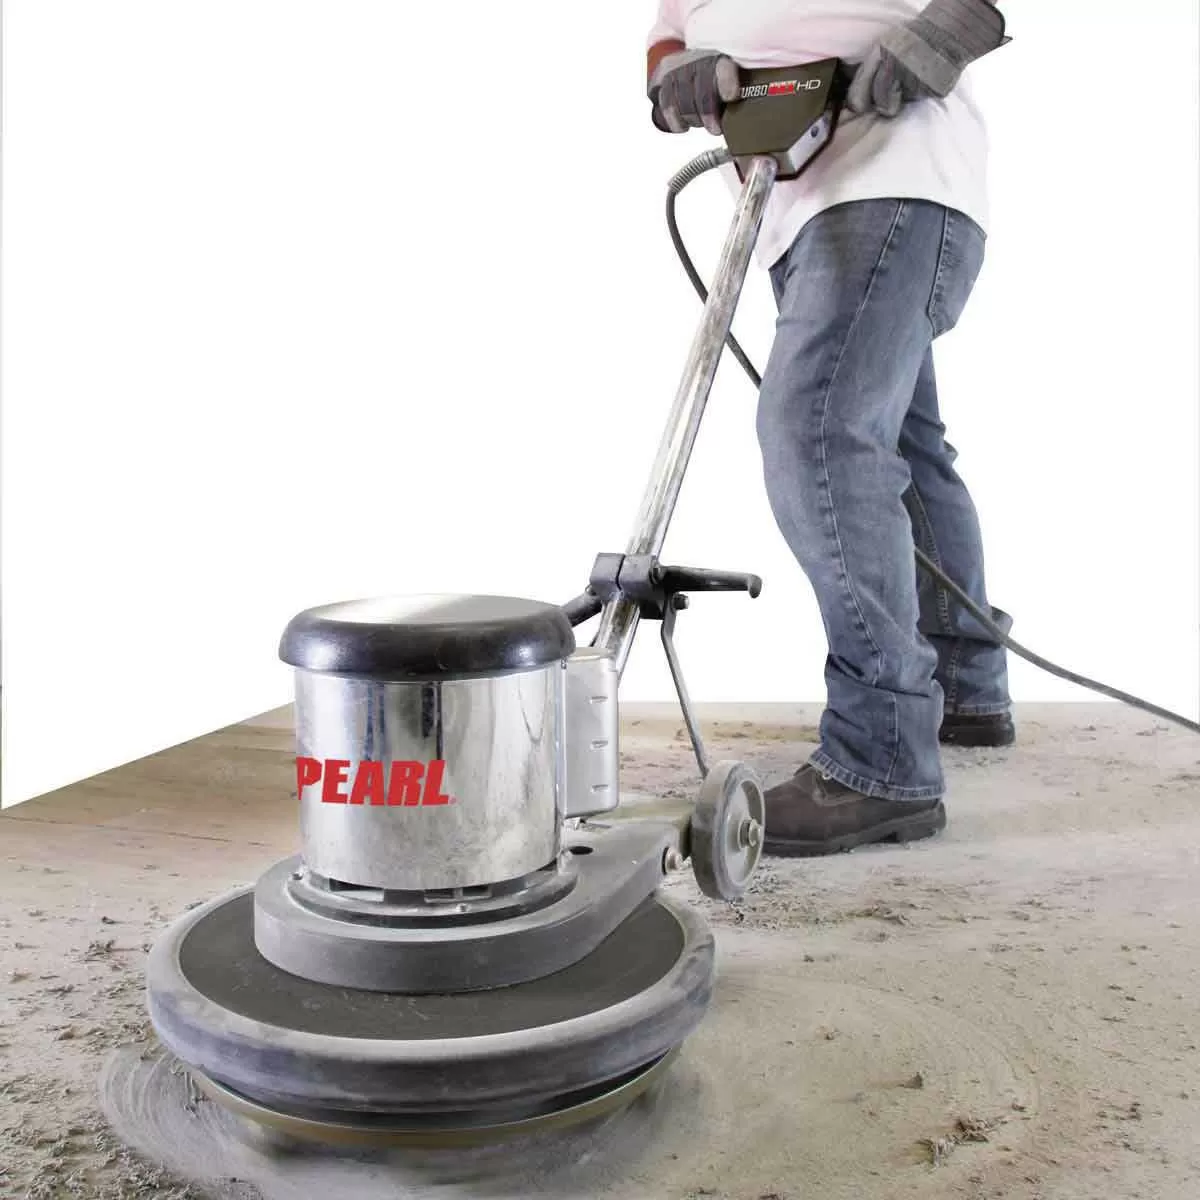 Pearl Turbo Max HDi 17" Pro Grinder HD Torque, Durable, Low RPM Perfect machine for